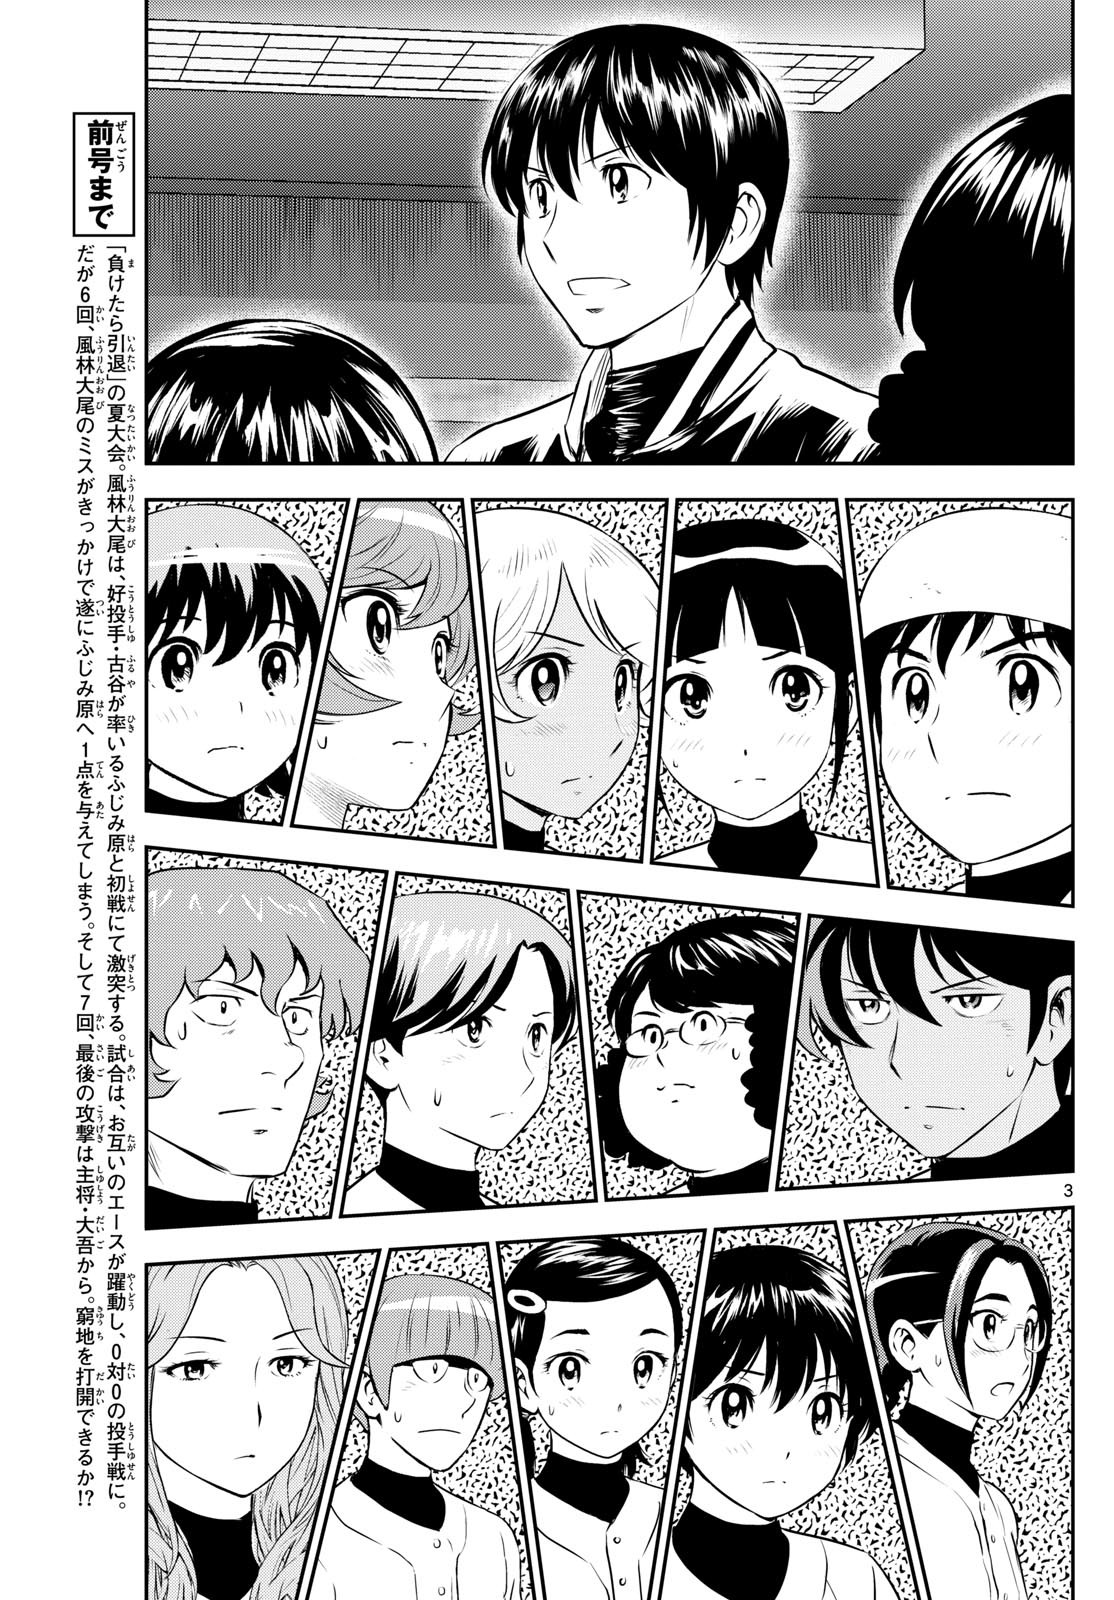 Major 2nd - メジャーセカンド - Chapter 274 - Page 3